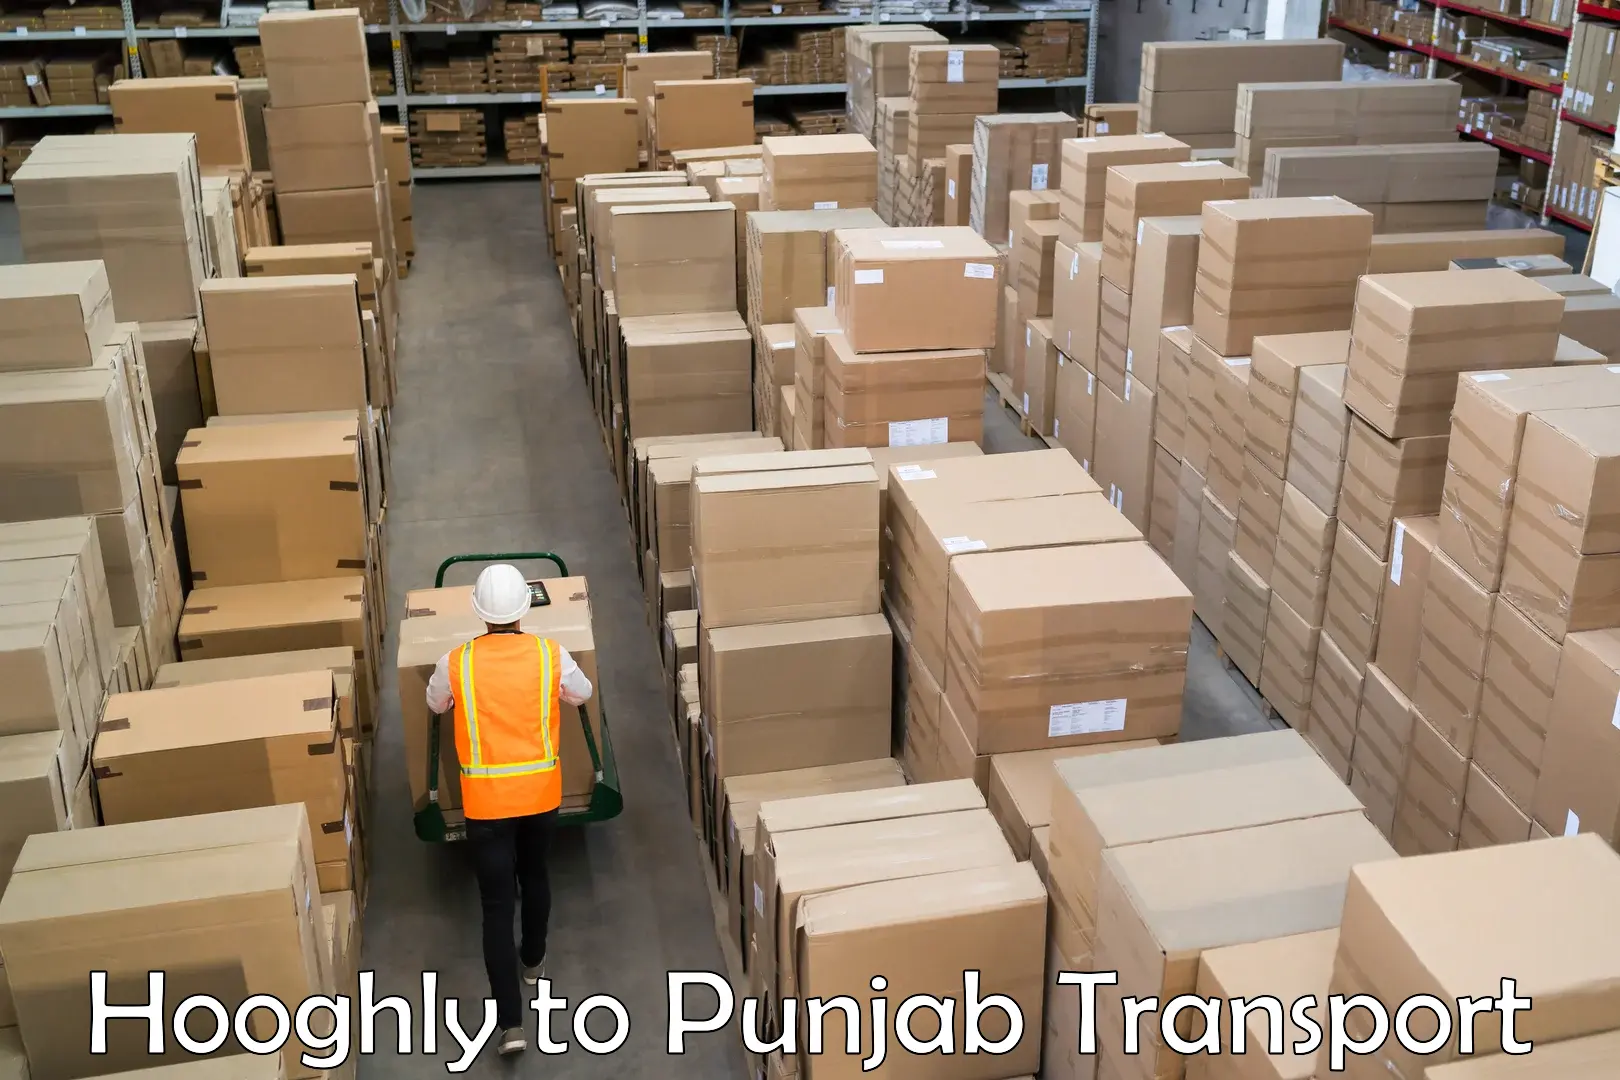 Furniture transport service Hooghly to Barnala